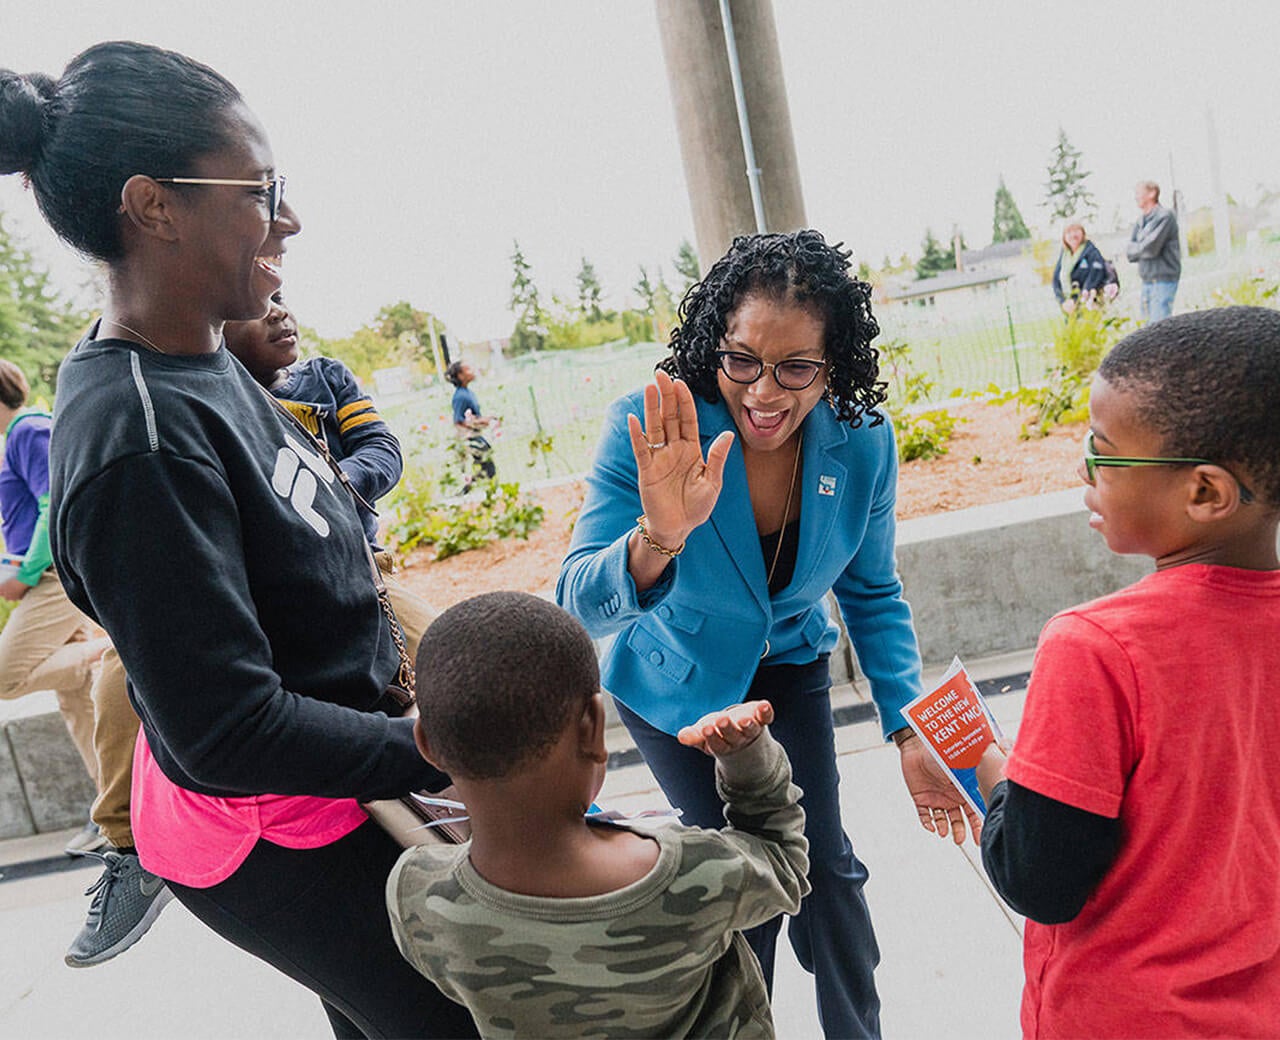 YMCA employee high fives young child at an outdoor event